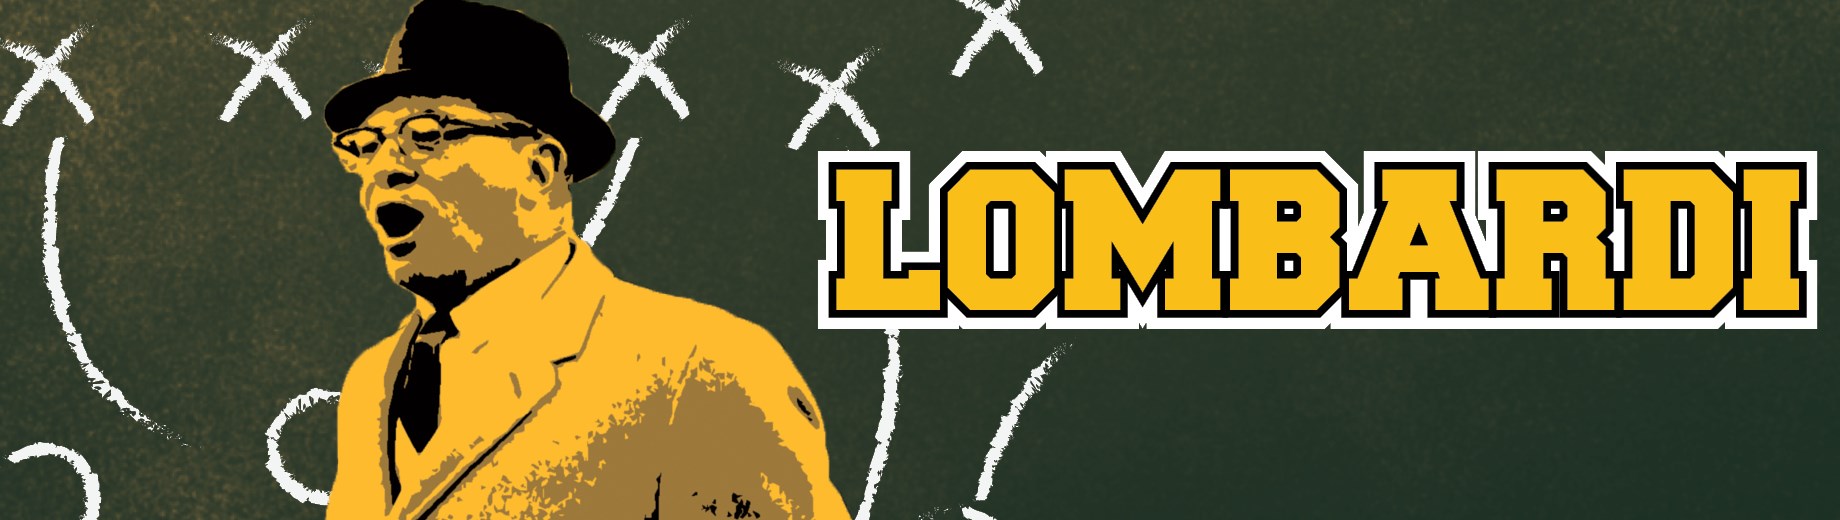 The Premiere Playhouse presents Lombardi